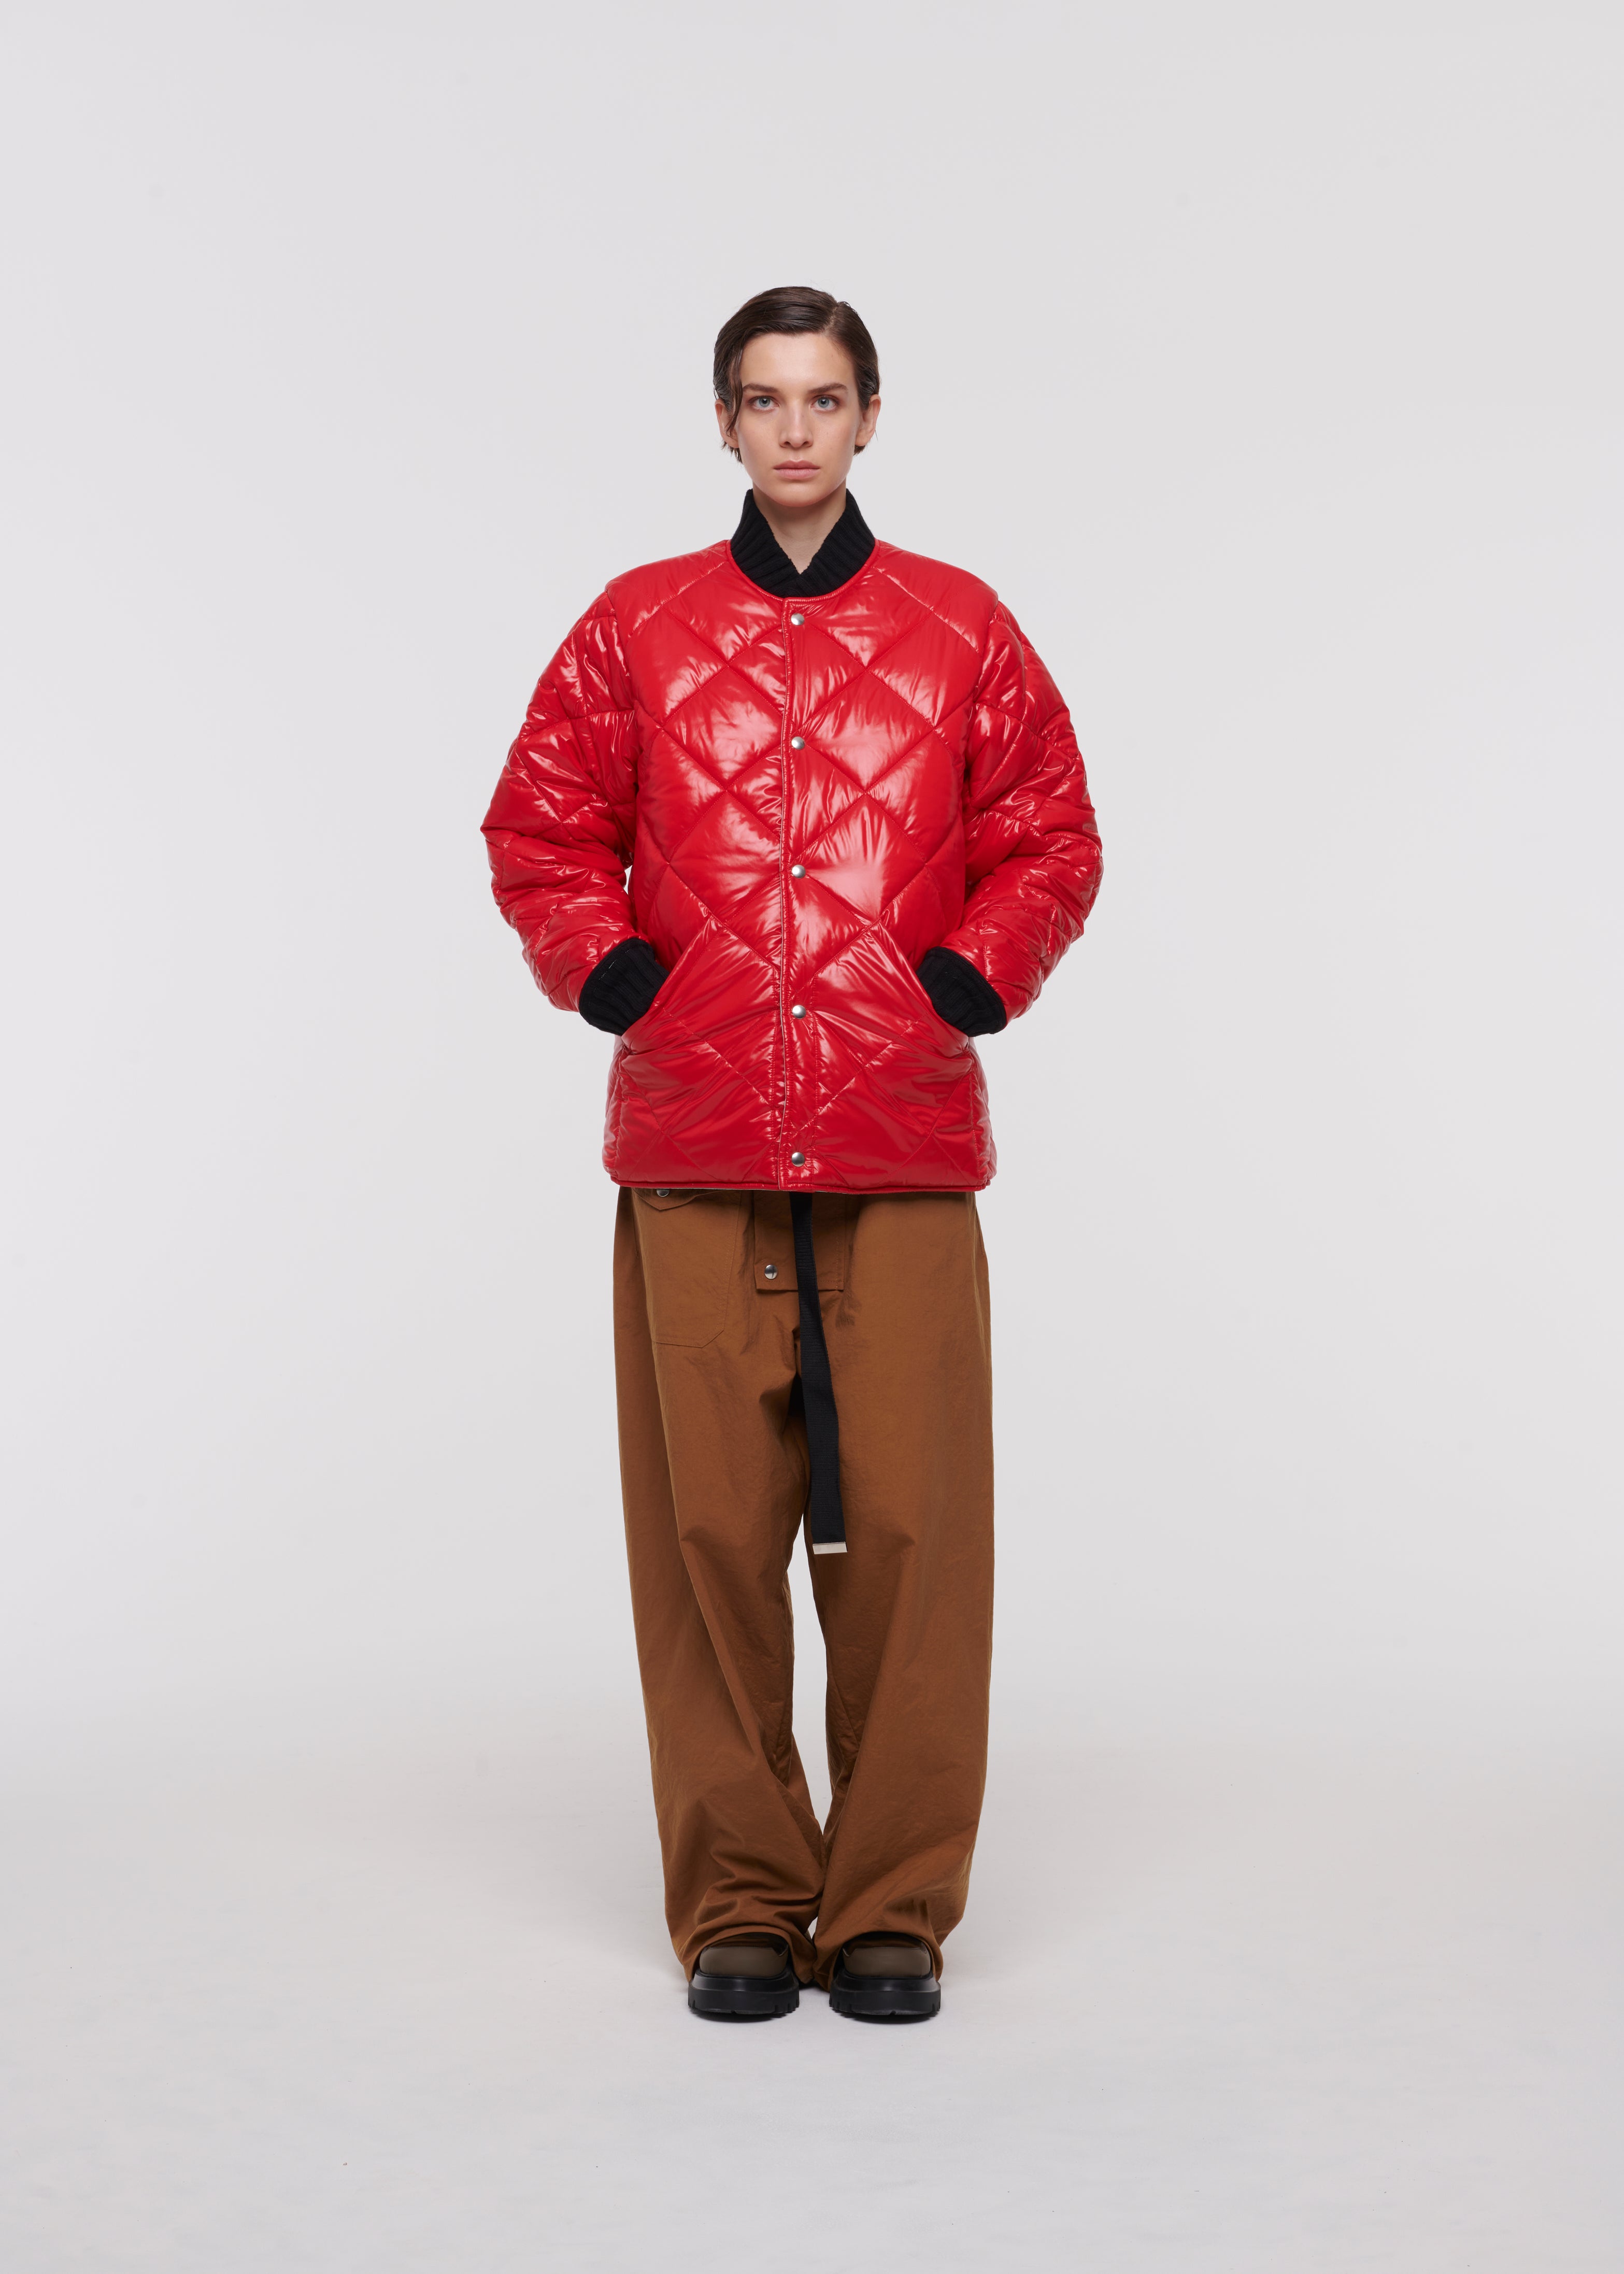 REVERSIBLE CLEAR WATER QUILTED JACKET